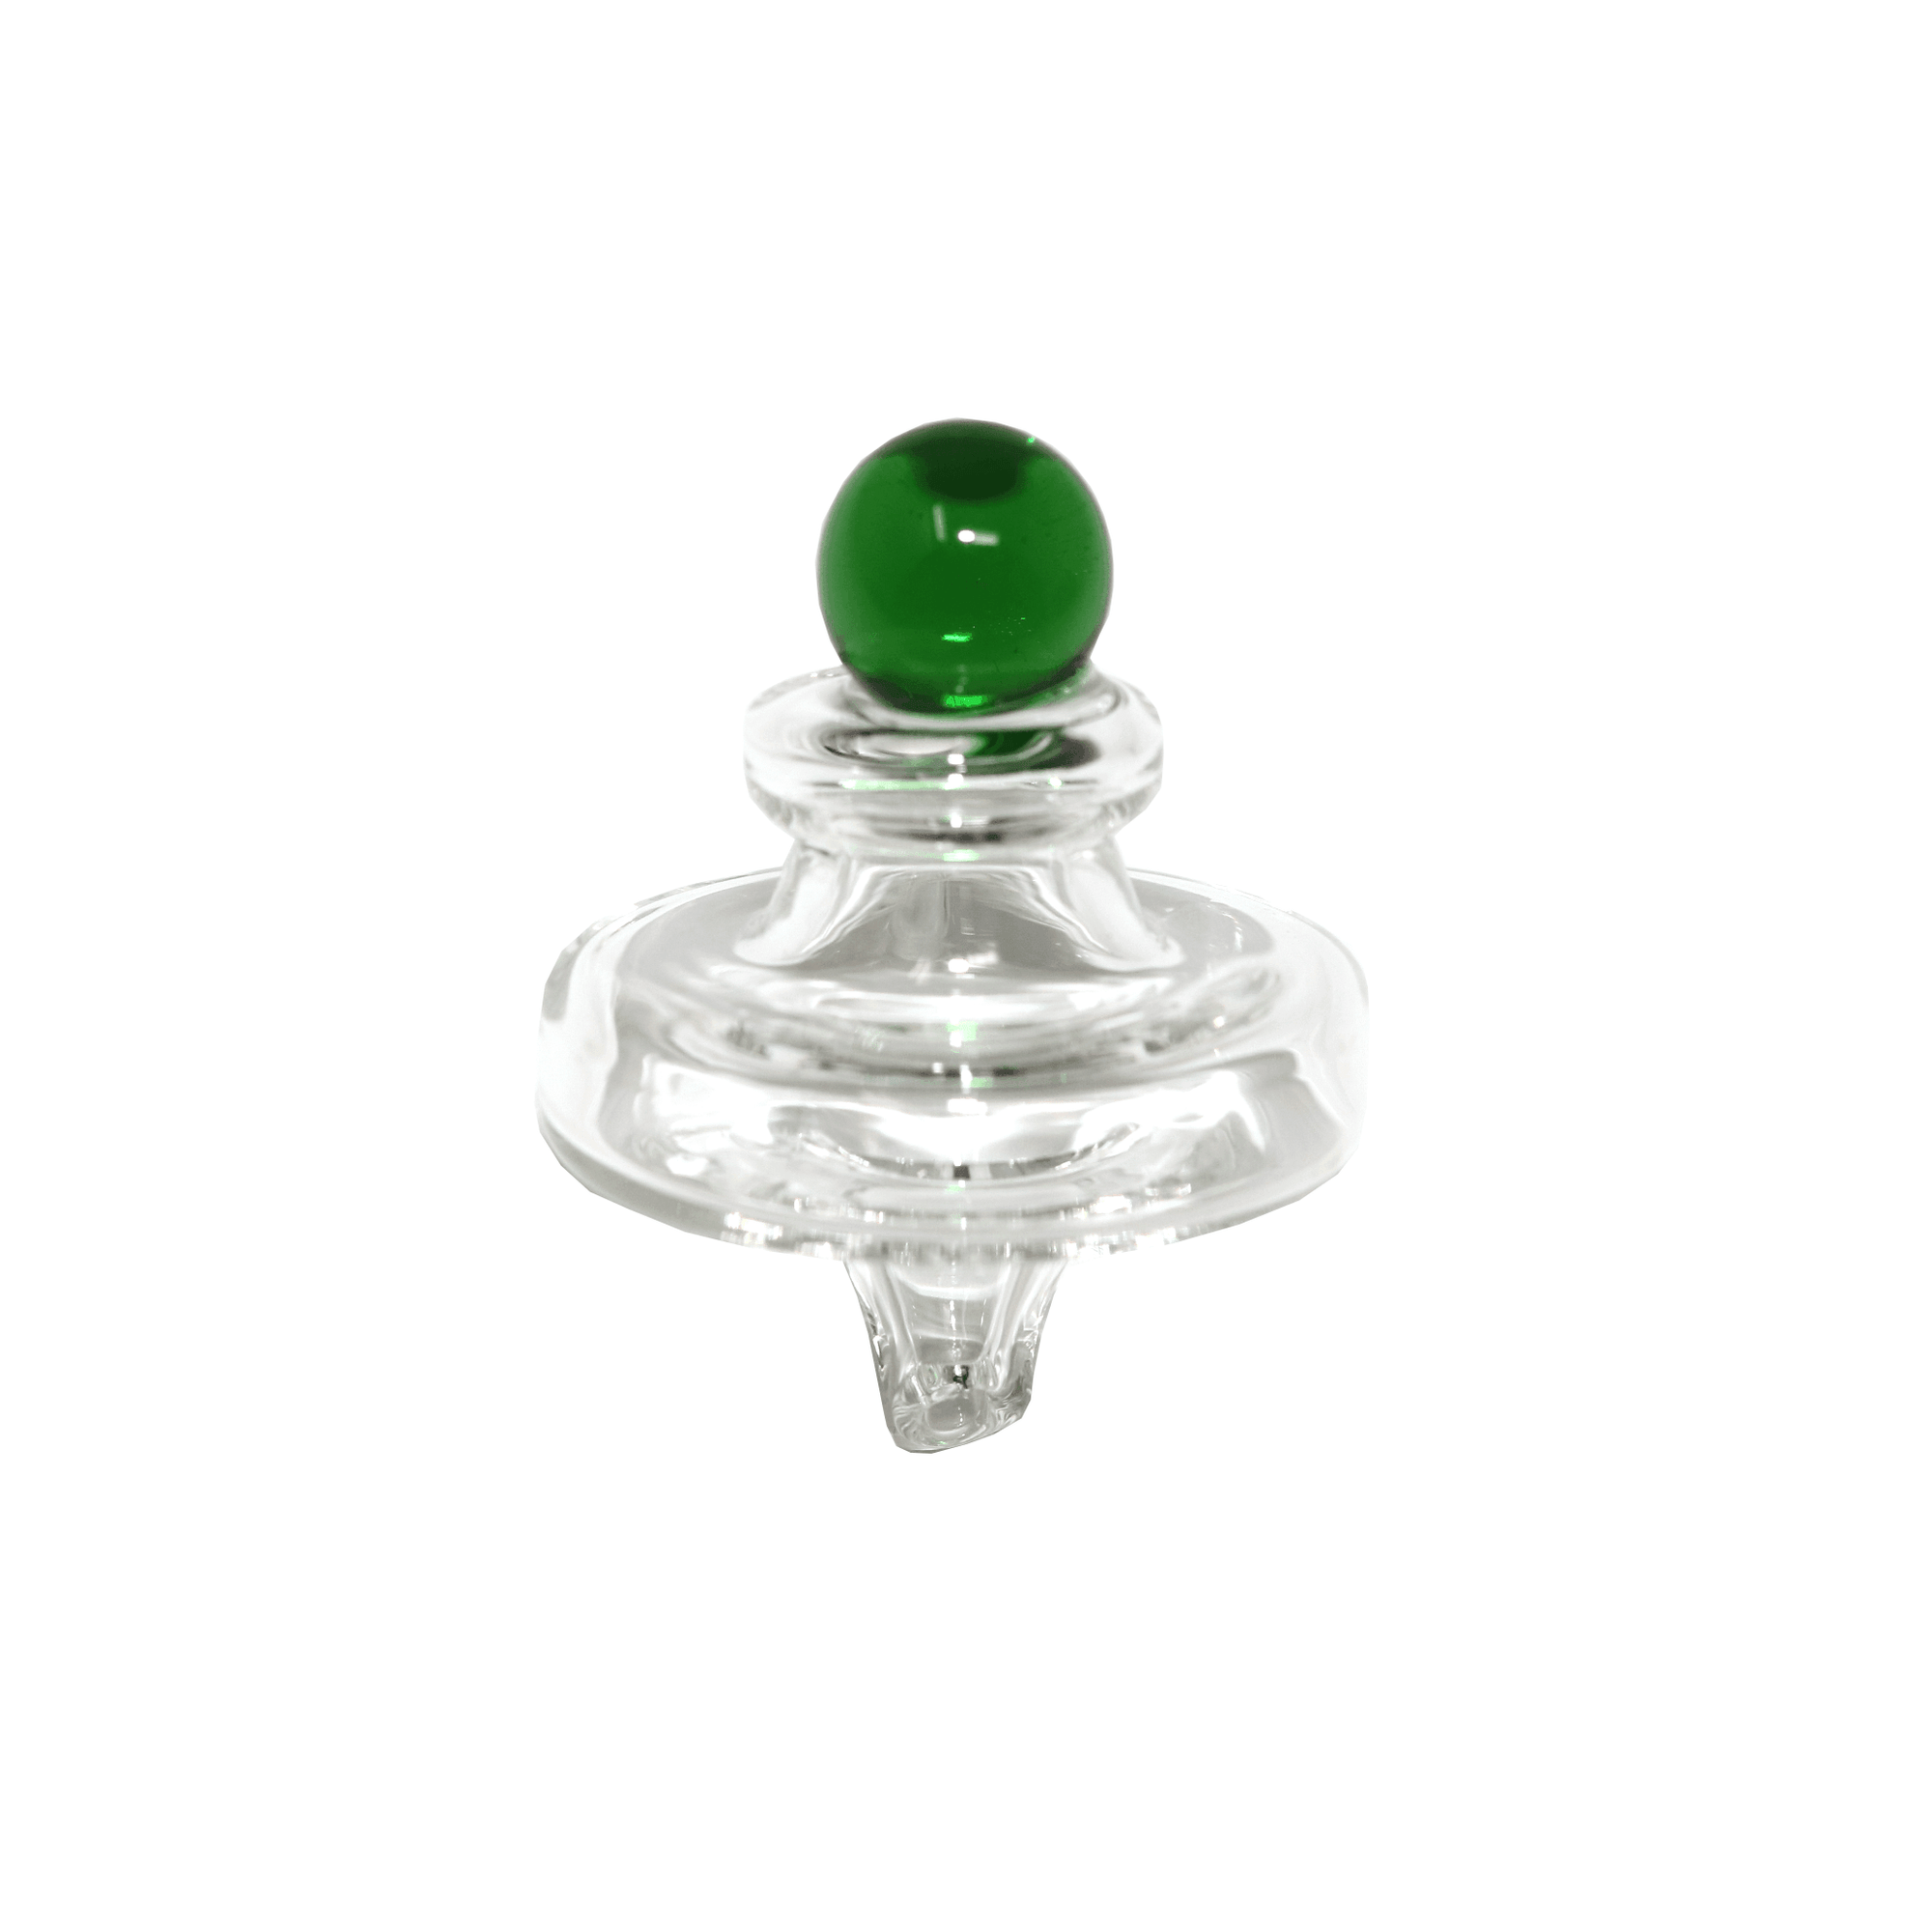 Flat Top Quartz Banger 18mm Male With Cup Insert and Saucer Cap | Carb Cap | the dabbing specialists